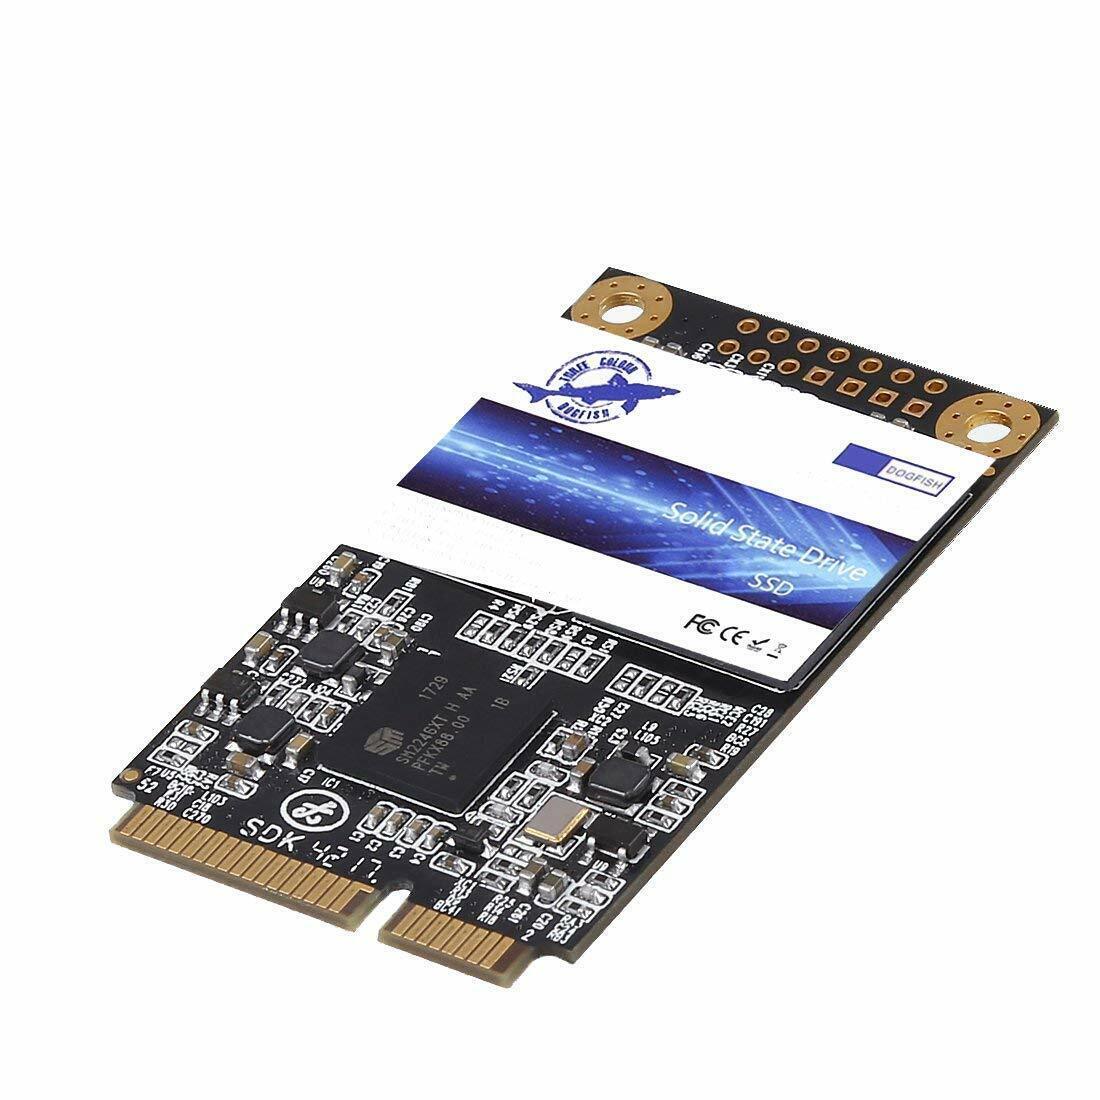 Dogfish PCIE 2242 SSD 2.5